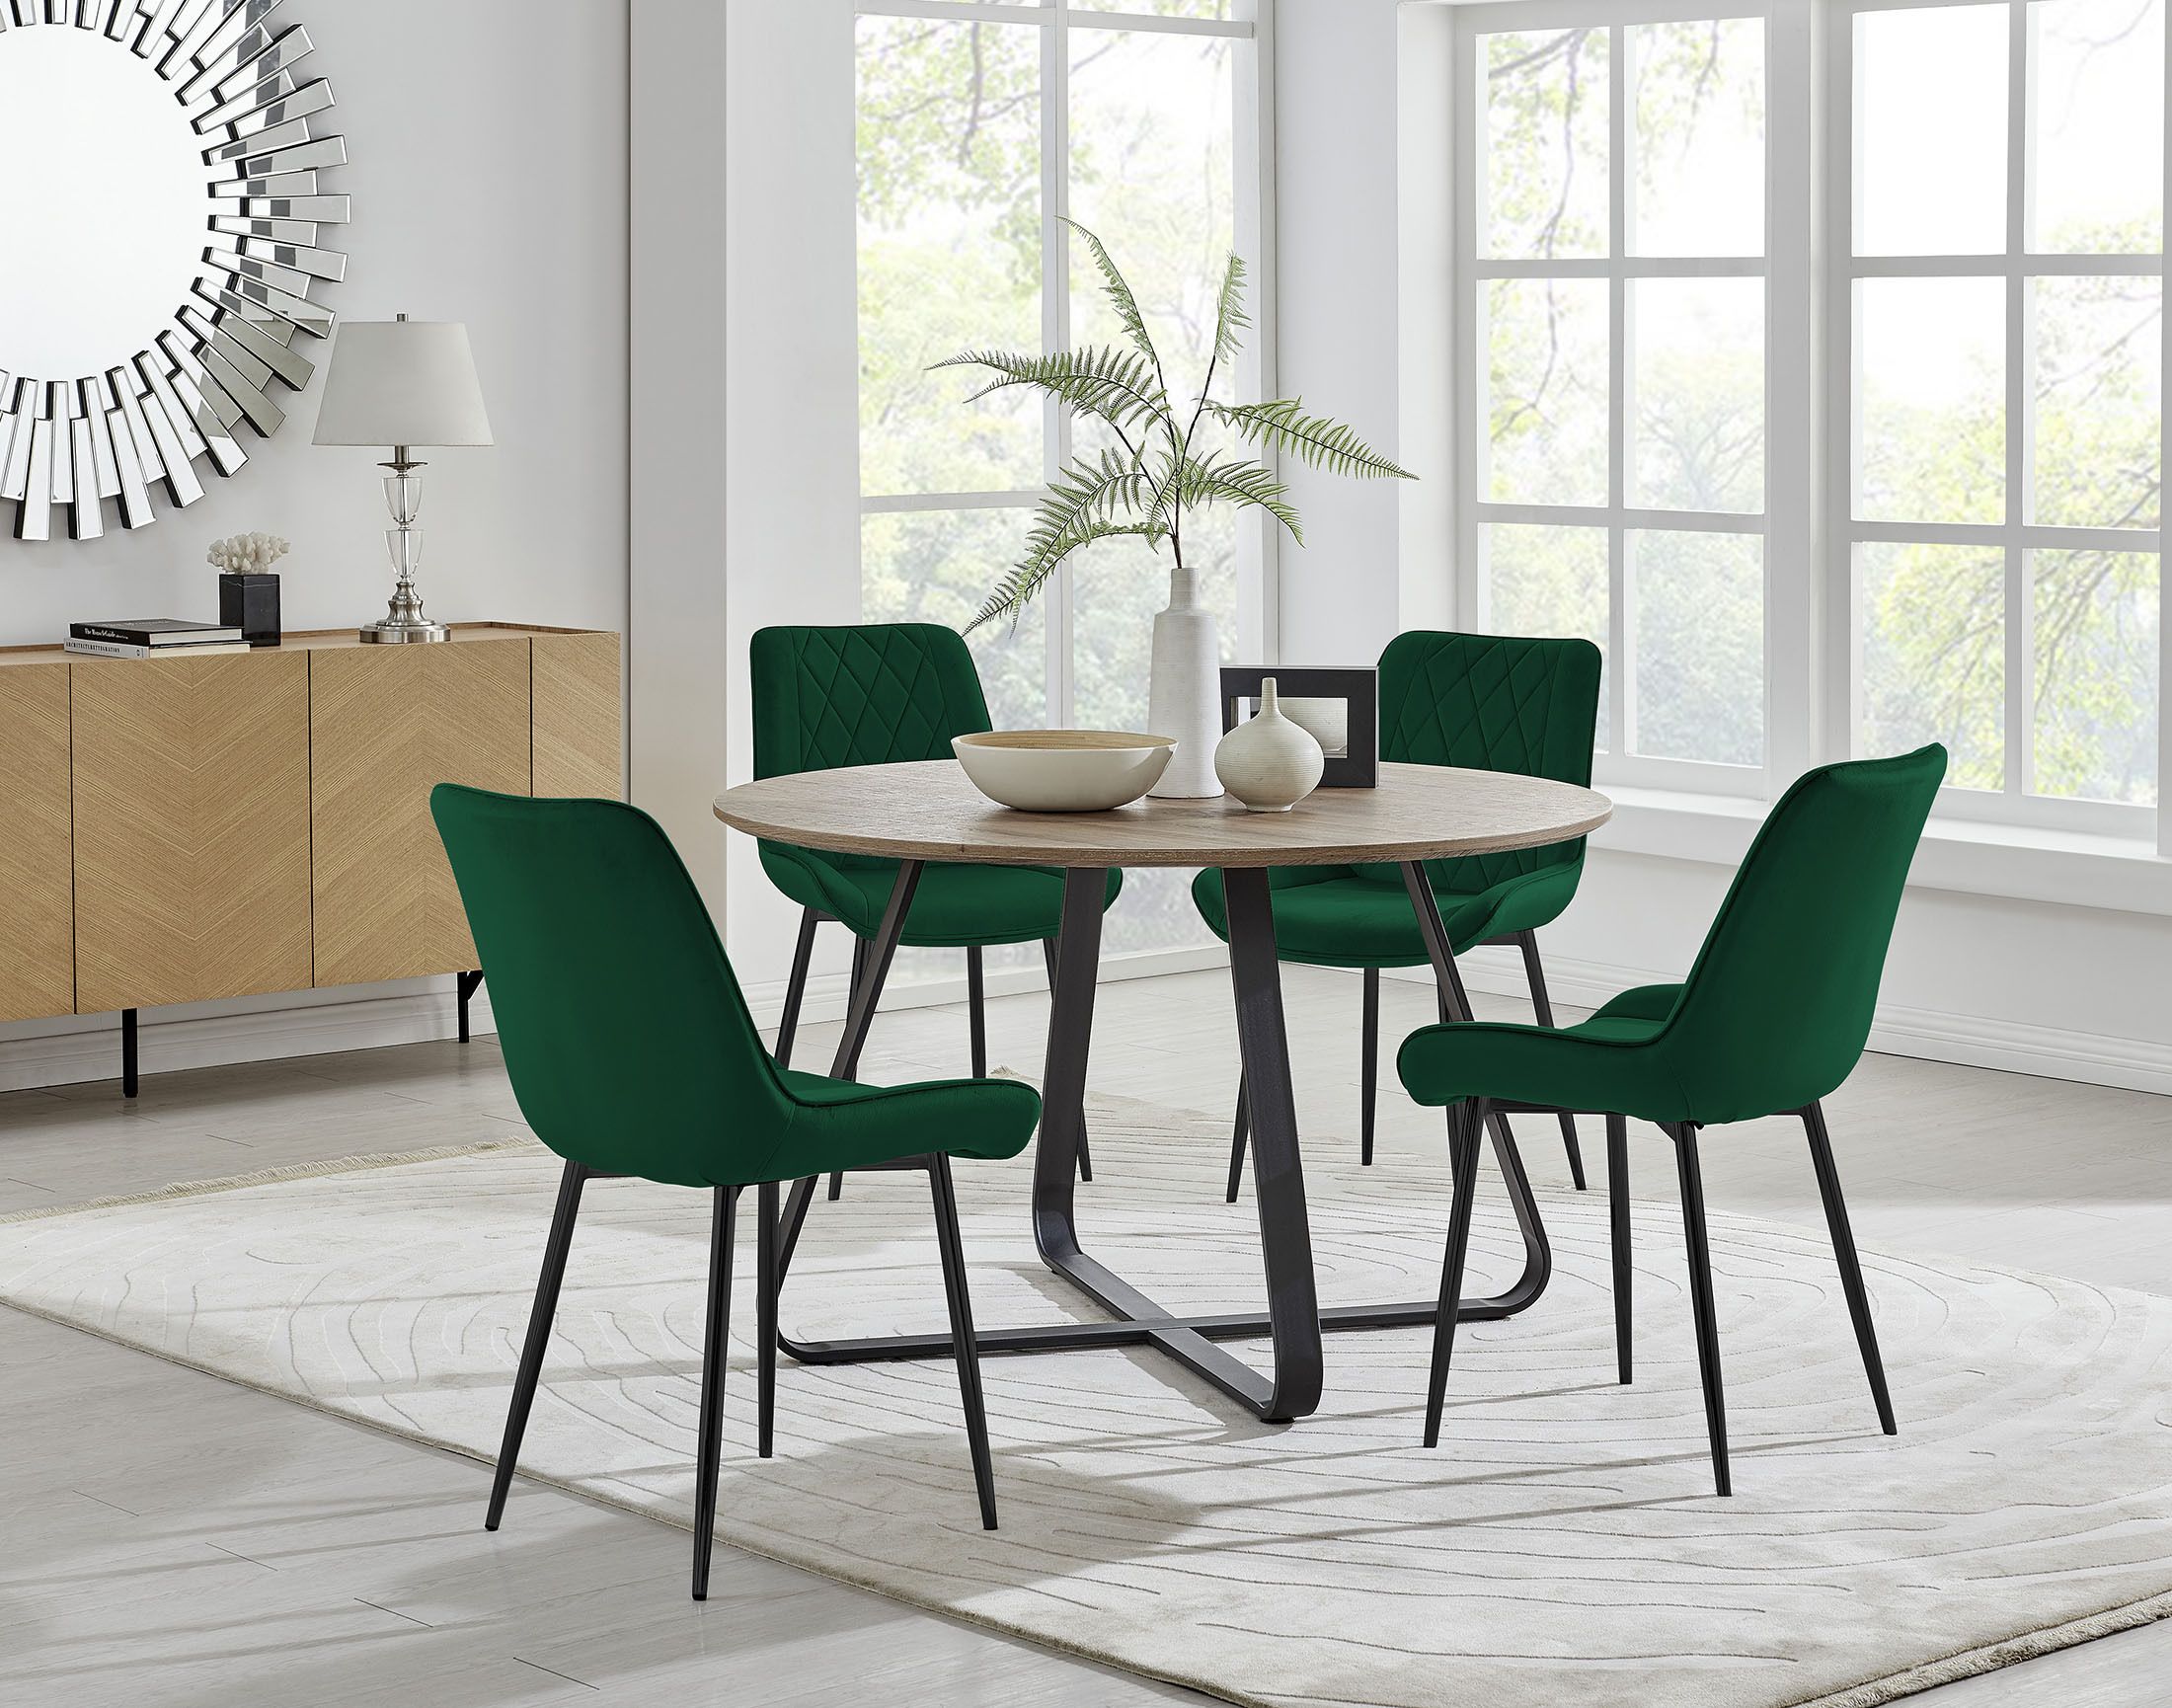 Santorini Brown Round Dining Table And 6 Pesaro Black Leg Within Most Popular Dark Brown Round Dining Tables (View 14 of 15)